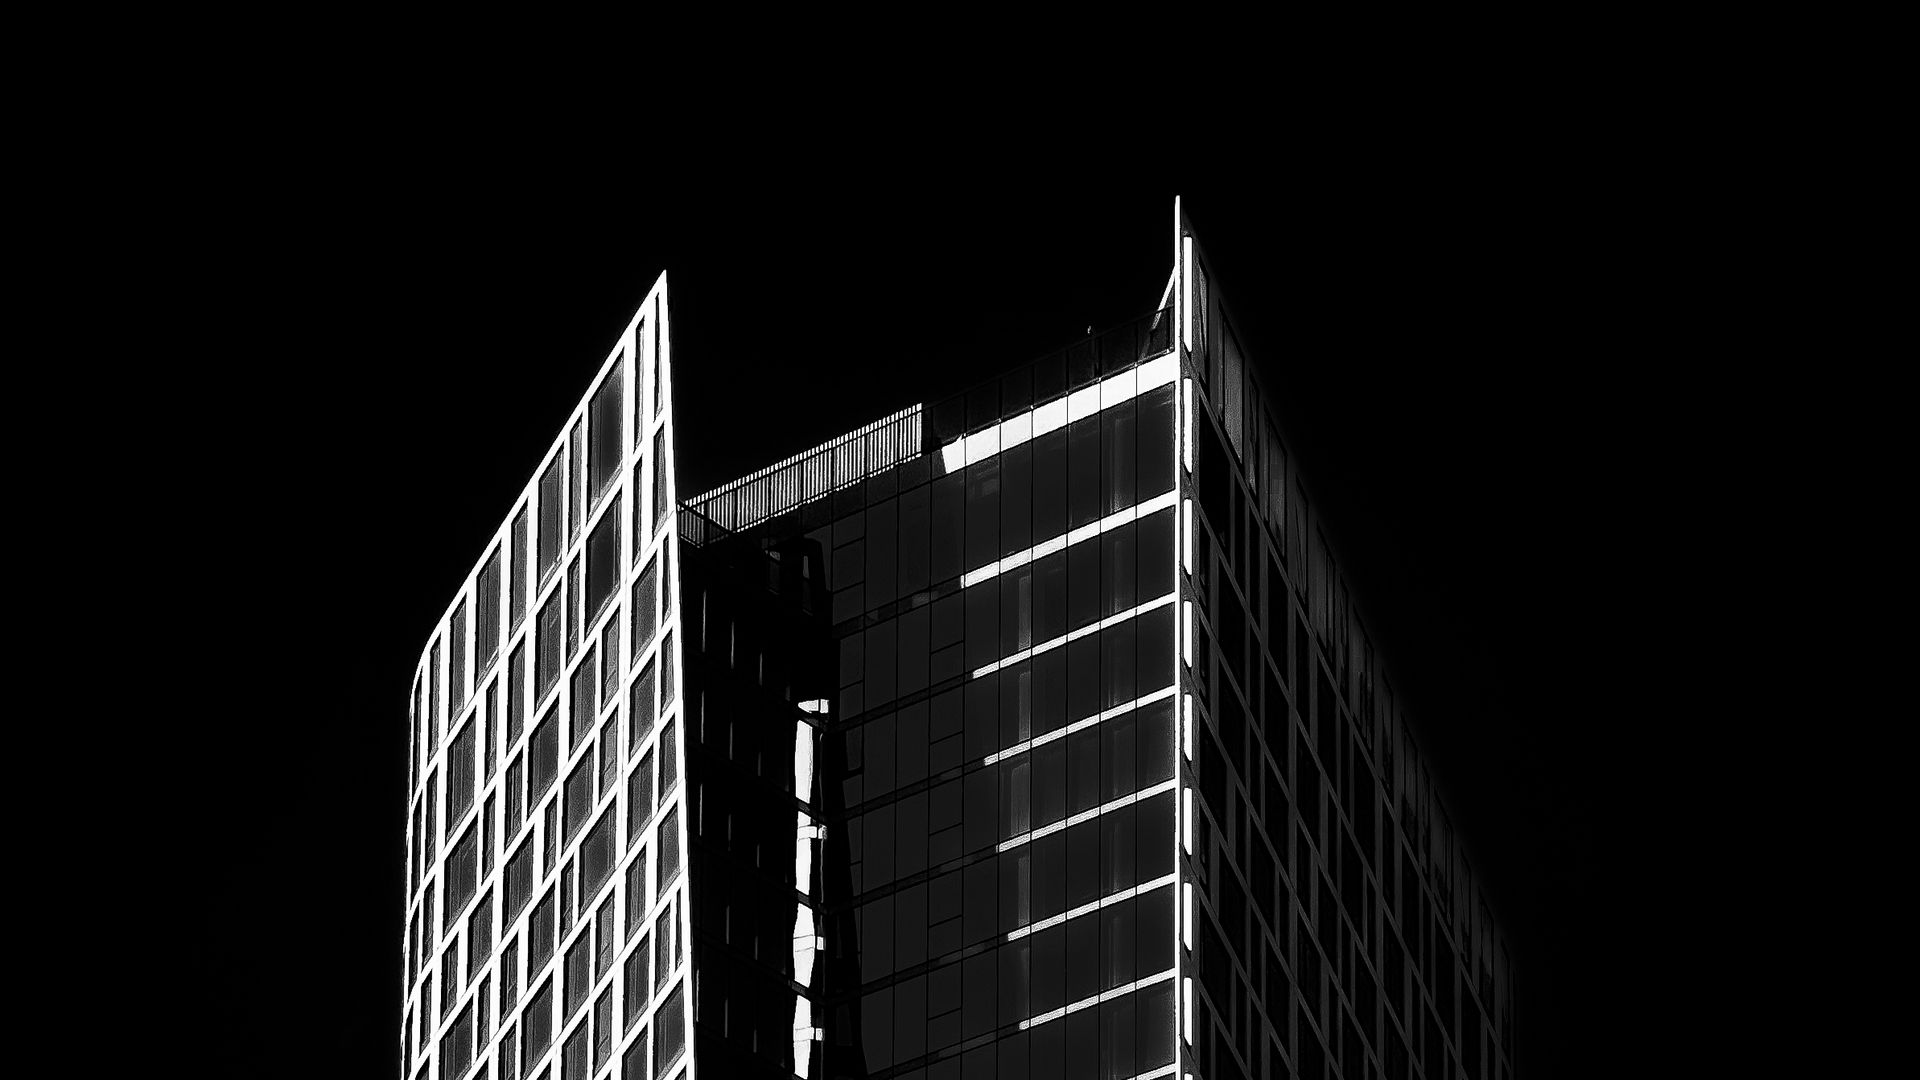 Download wallpaper 1920x1080 building, architecture, windows, black and ...